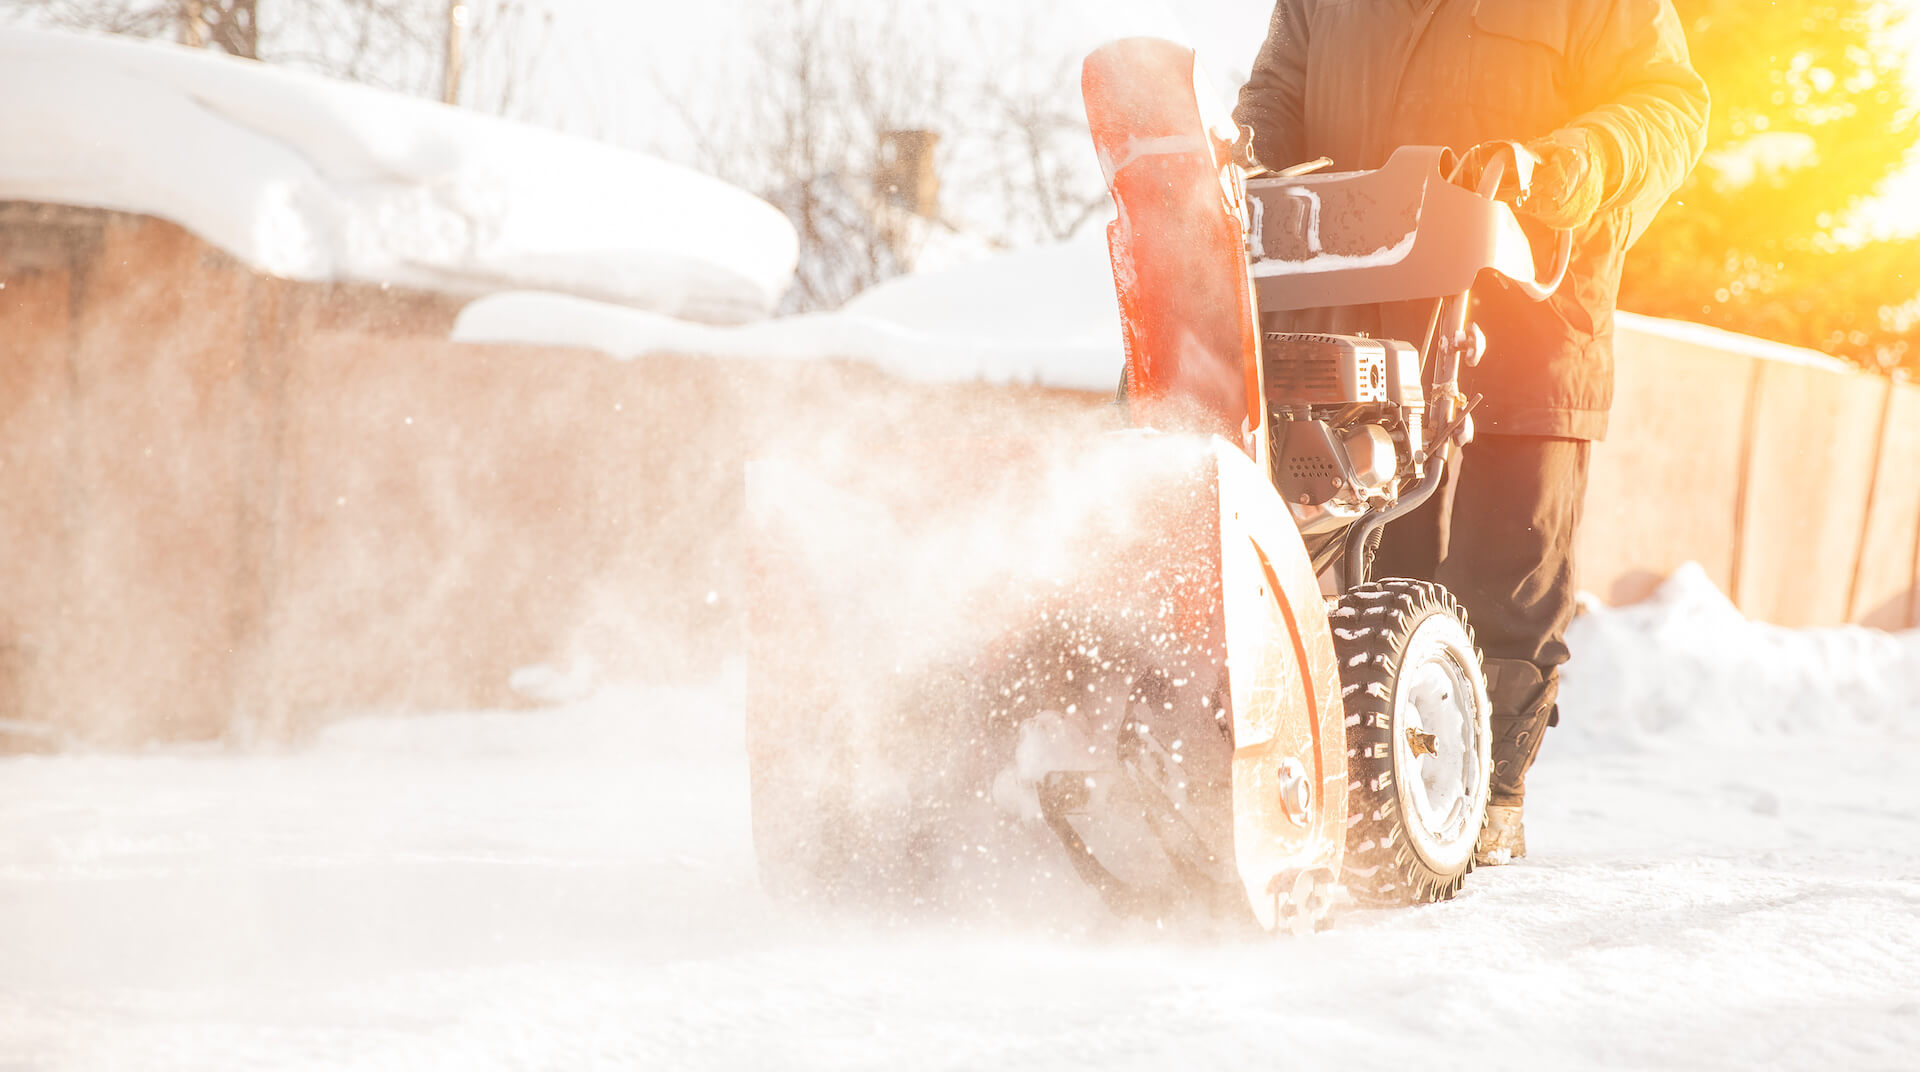 How To Prepare Your Snowblower for Winter